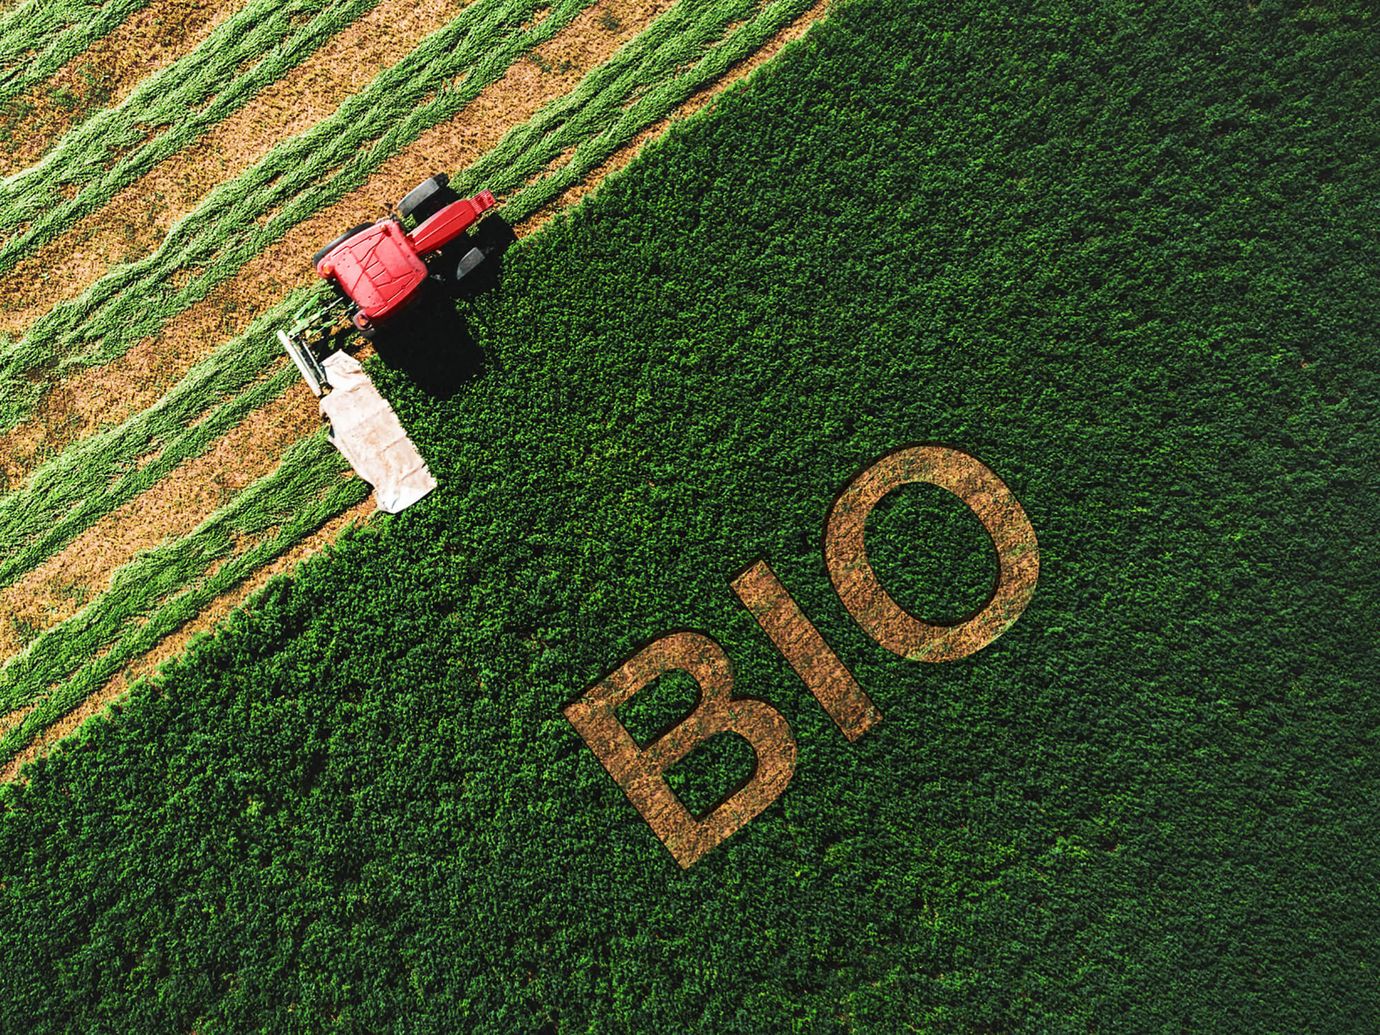 Crop field with the word "Bio" mowed into it